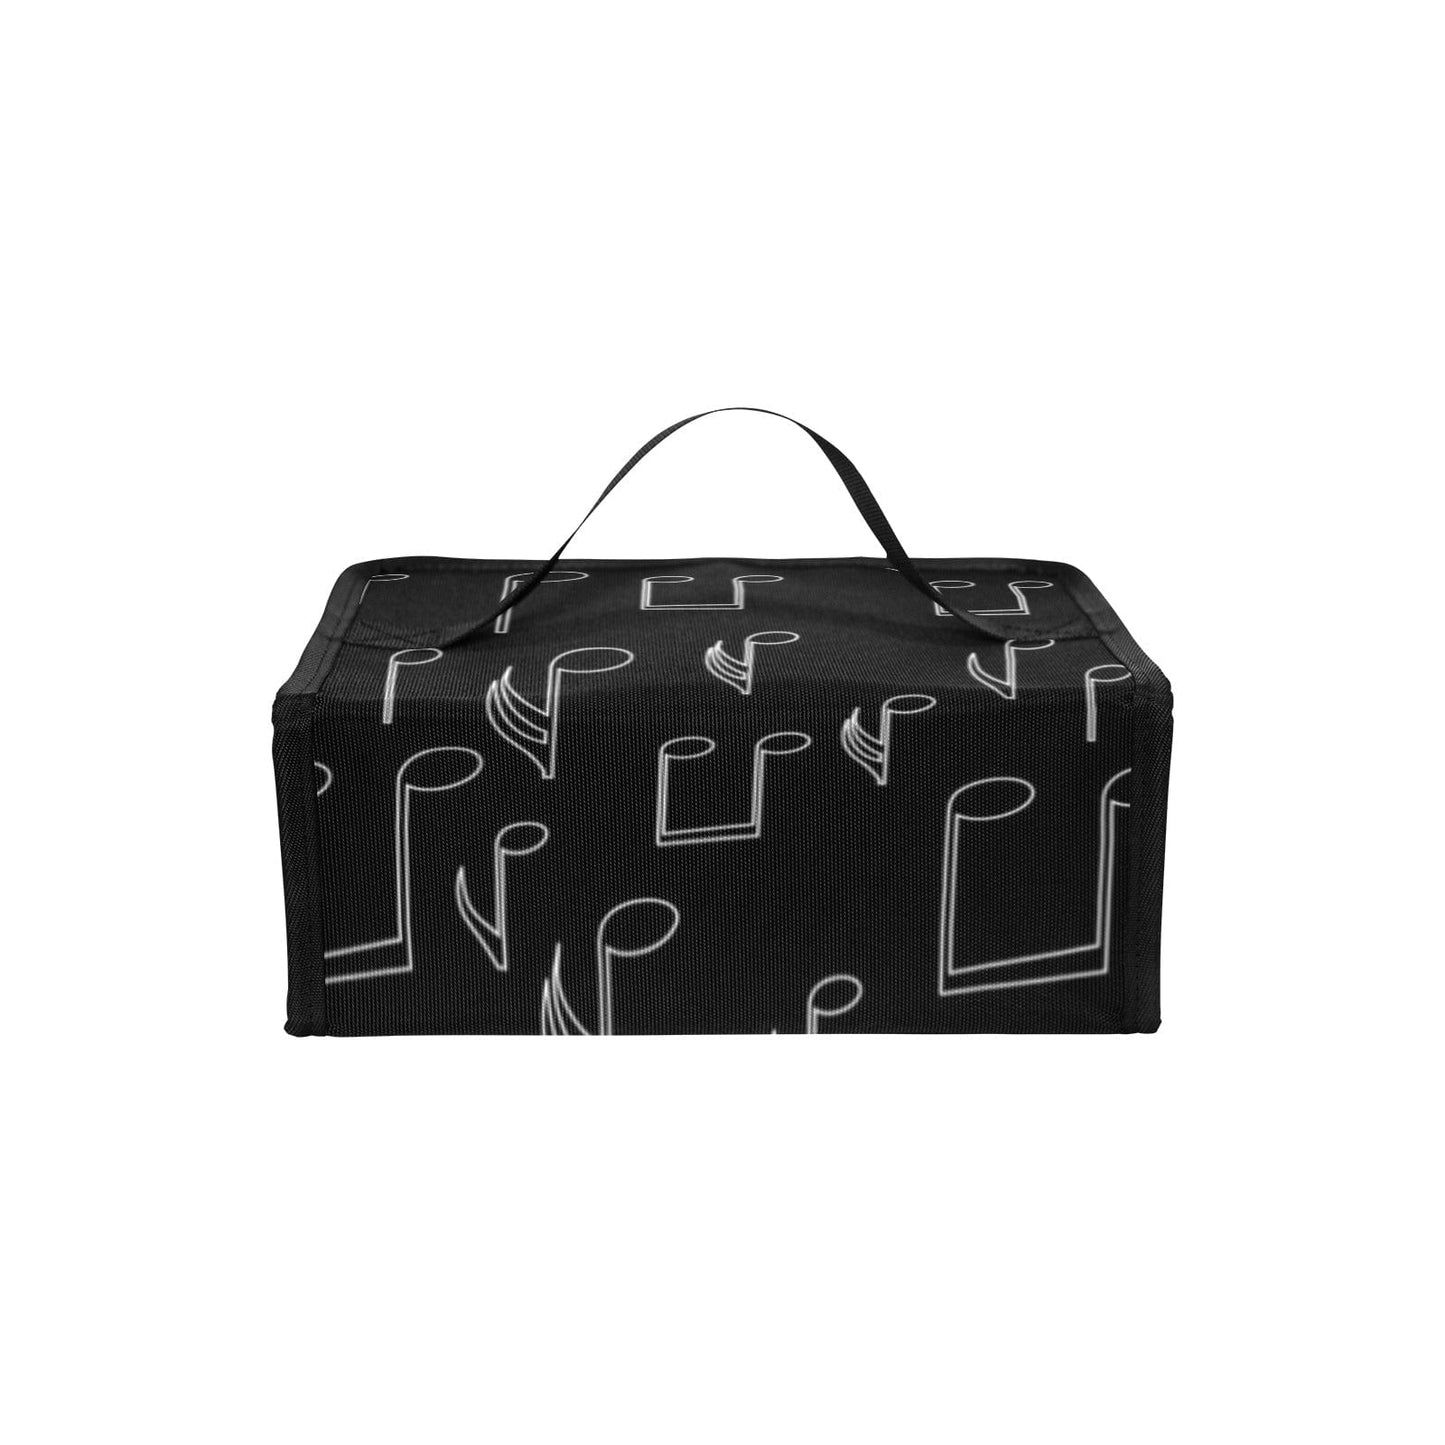 Tune In Keys Insulated Lunch Tote Bag